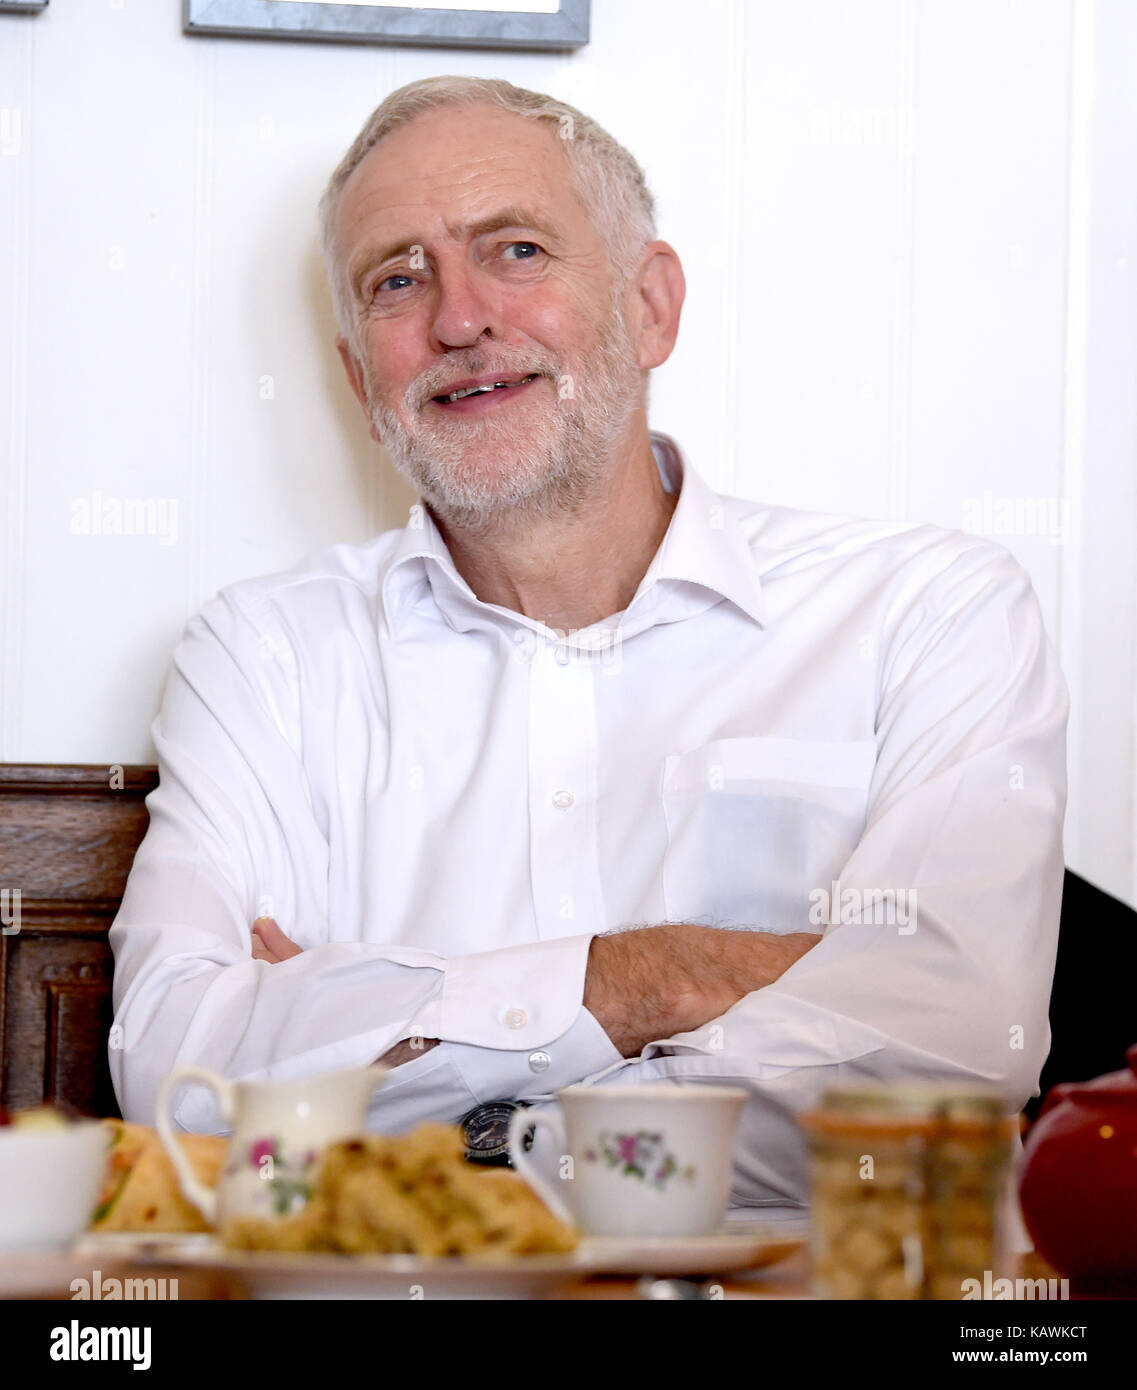 Brighton UK 23rd September 2017 - Jeremy Corbyn the leader of the Labour Party during a visit to the Baked Cafe in Worthing before the start of the Labour Party Conference being held in Brighton over the next few days Stock Photo